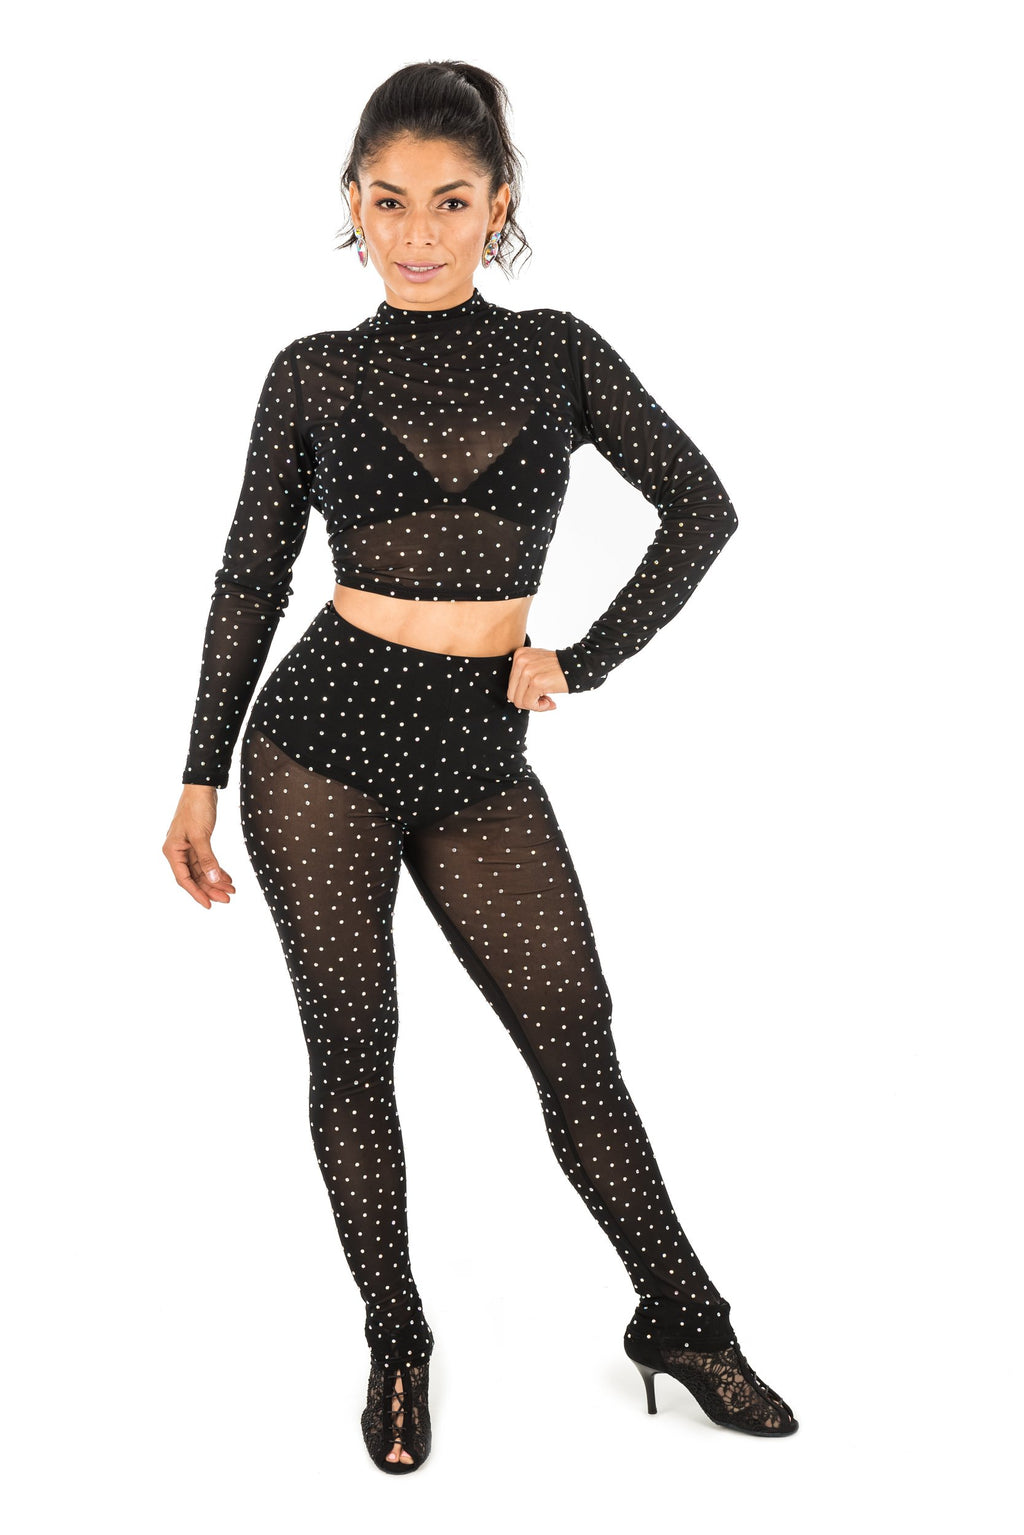 Long Sleeve lace rhinestone bodysuit with accents (620AW)  Long sleeve  lace, Lace bodysuit long sleeve, Dance outfits